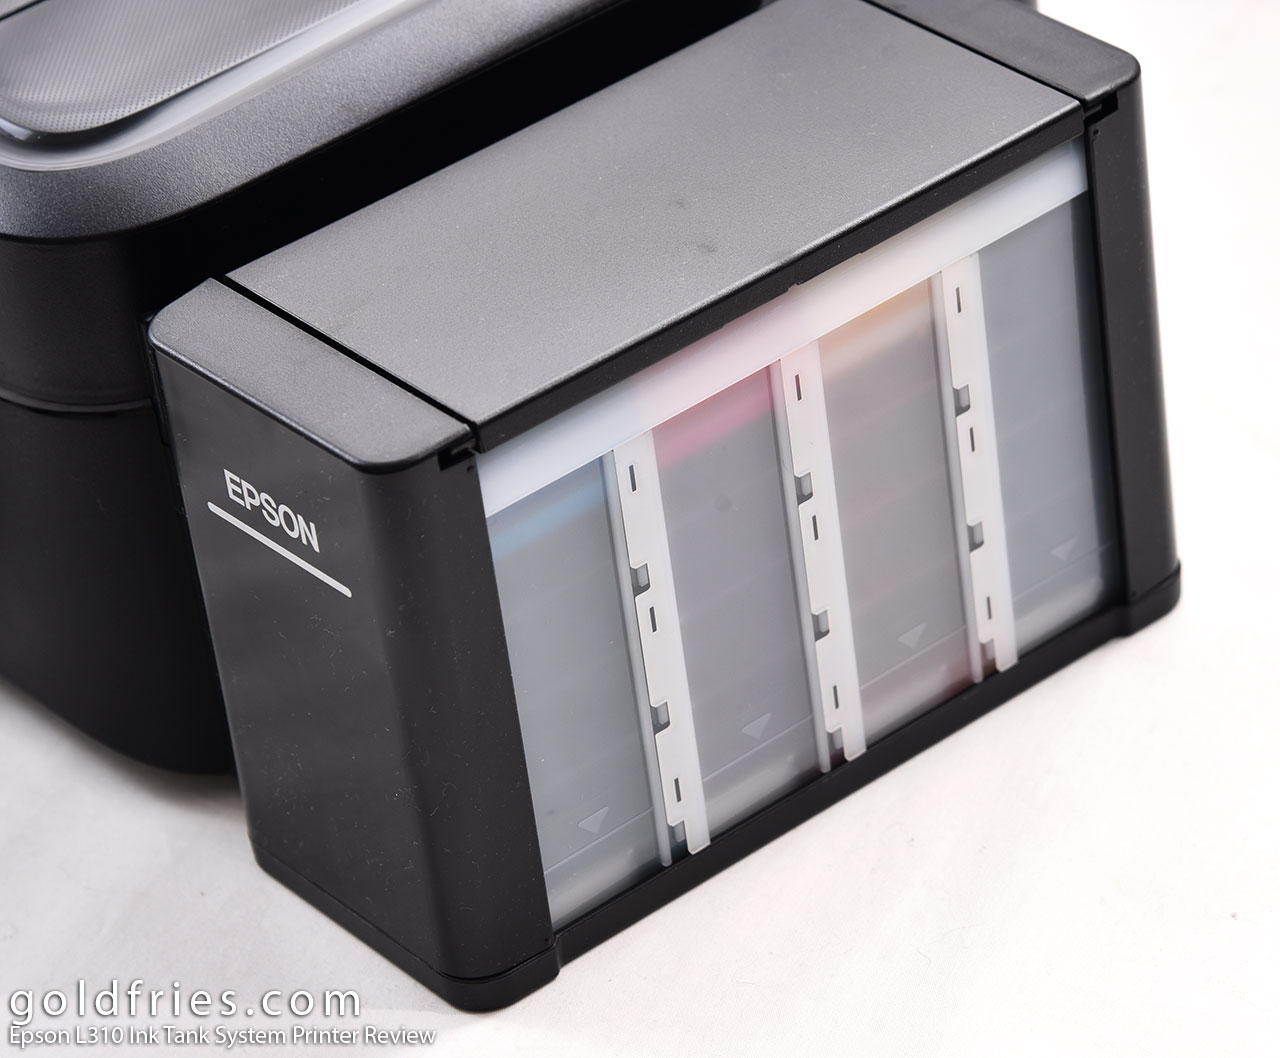 Epson L310 Ink Tank System Printer Review